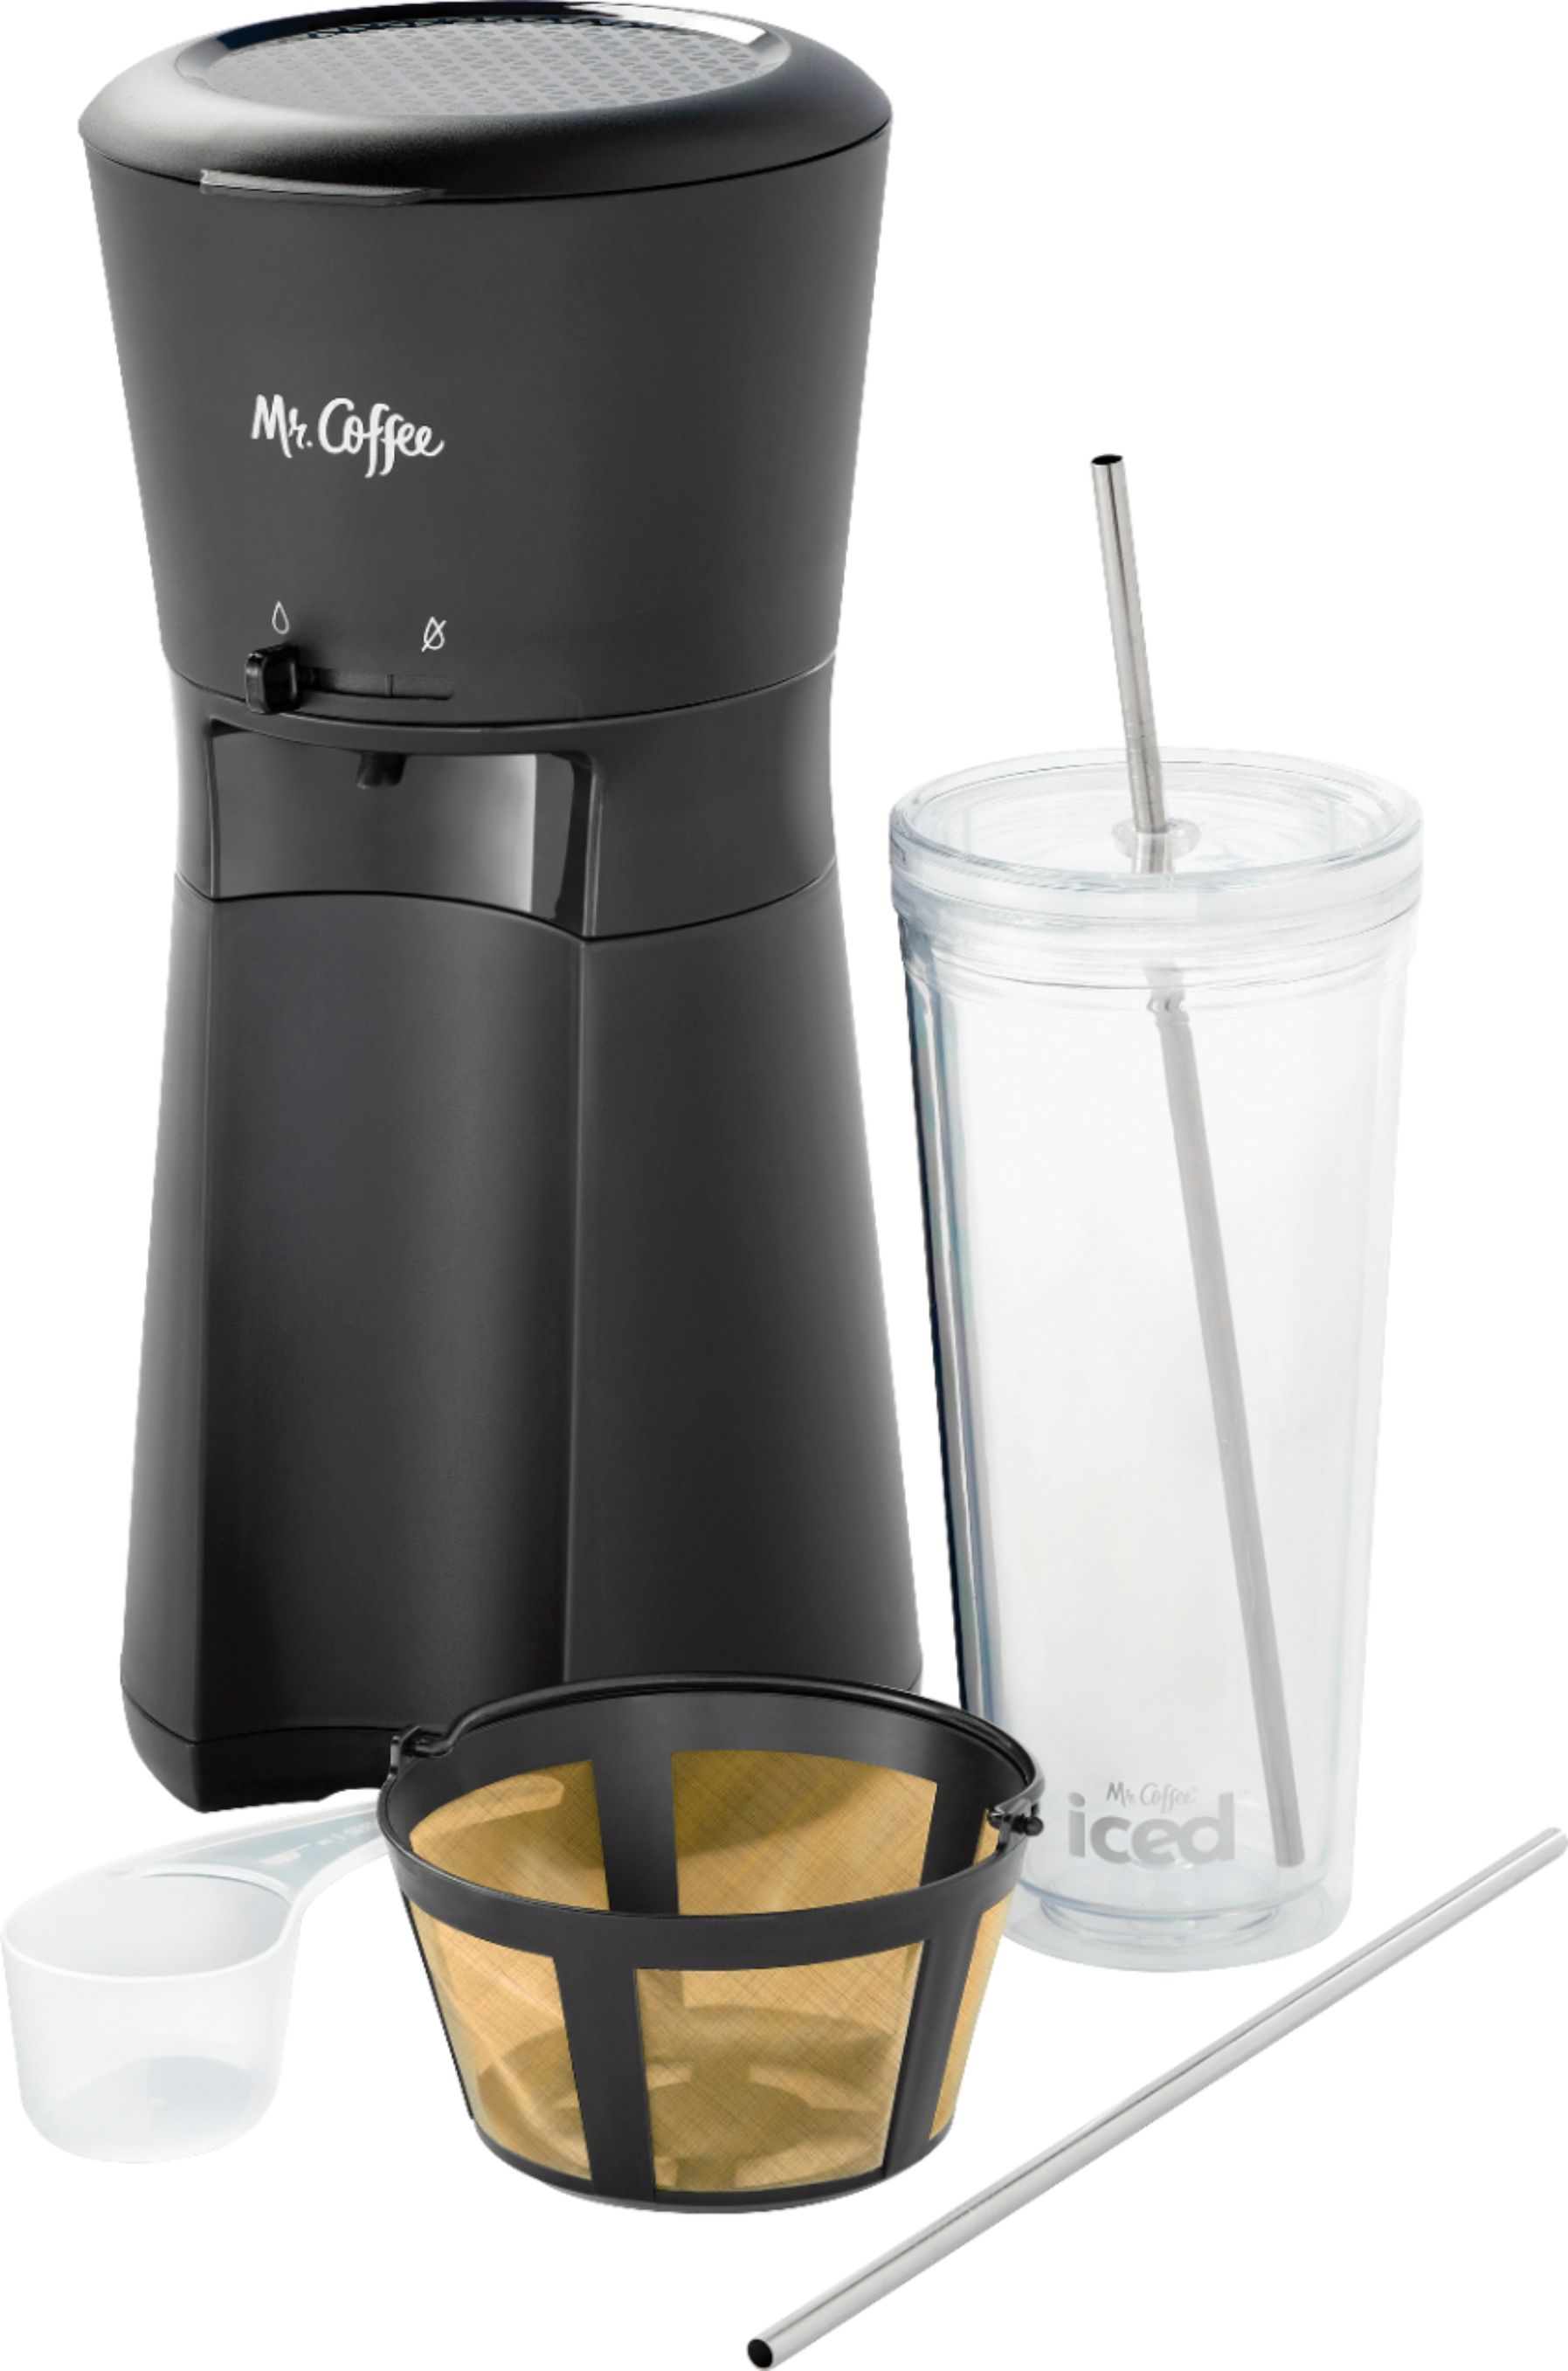 12-Cup Drip Coffee Maker with Reusable Filter & Coffee Scoop, Large Capacity,  Bl